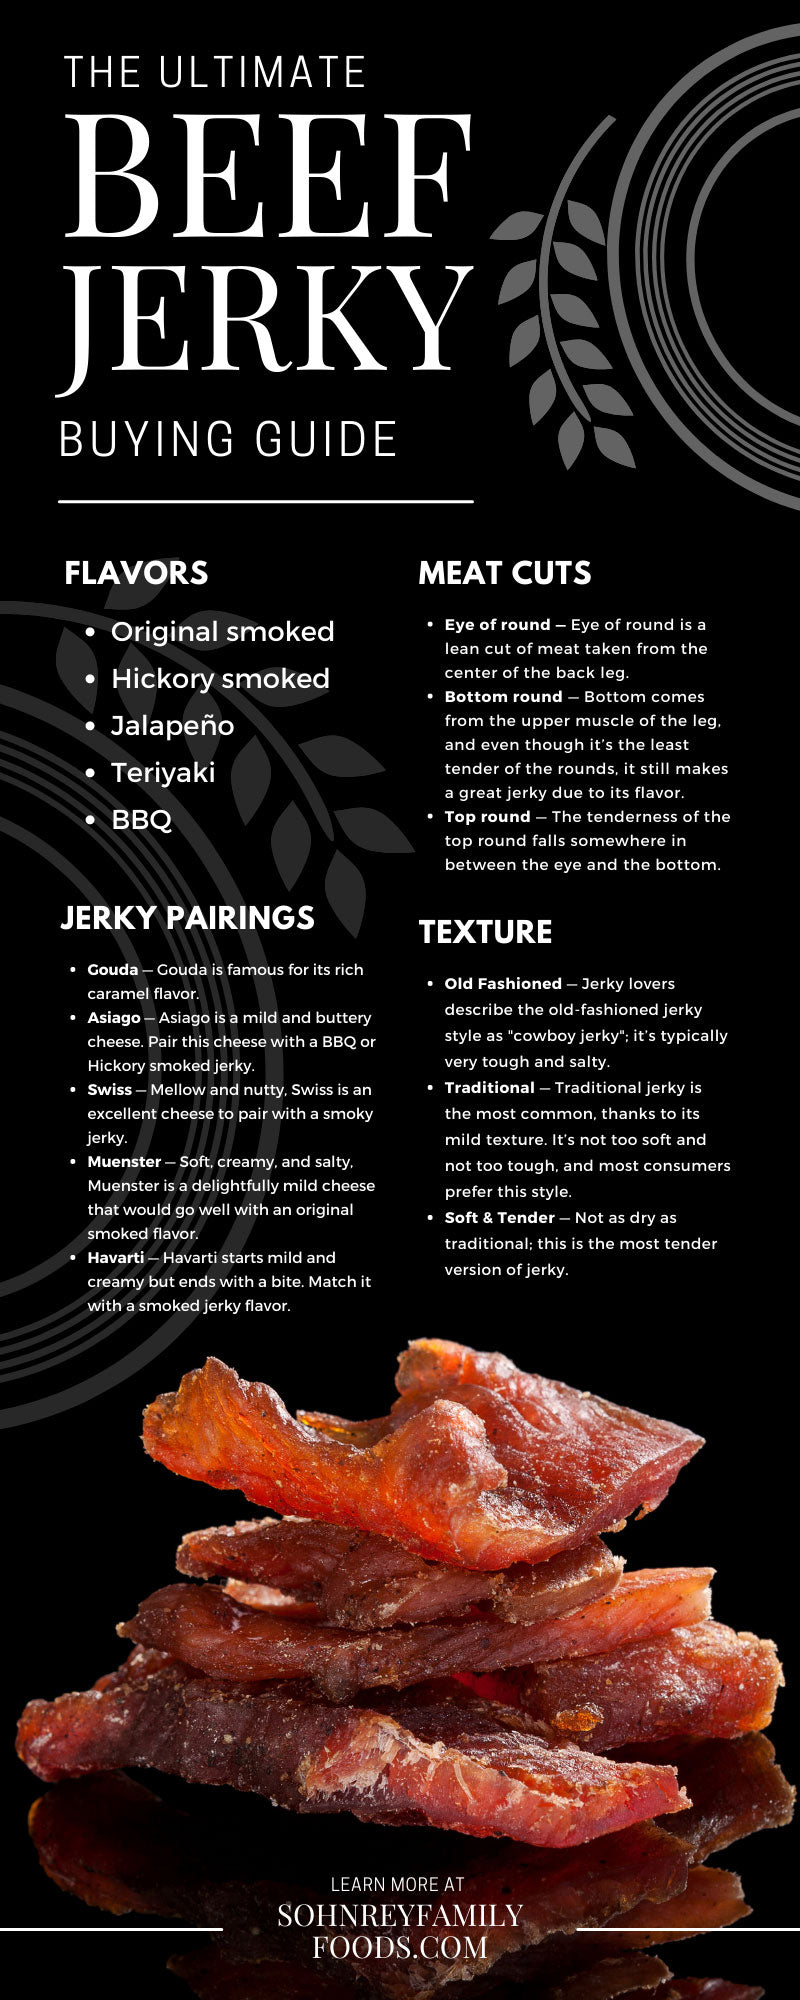 The Ultimate Beef Jerky Buying Guide